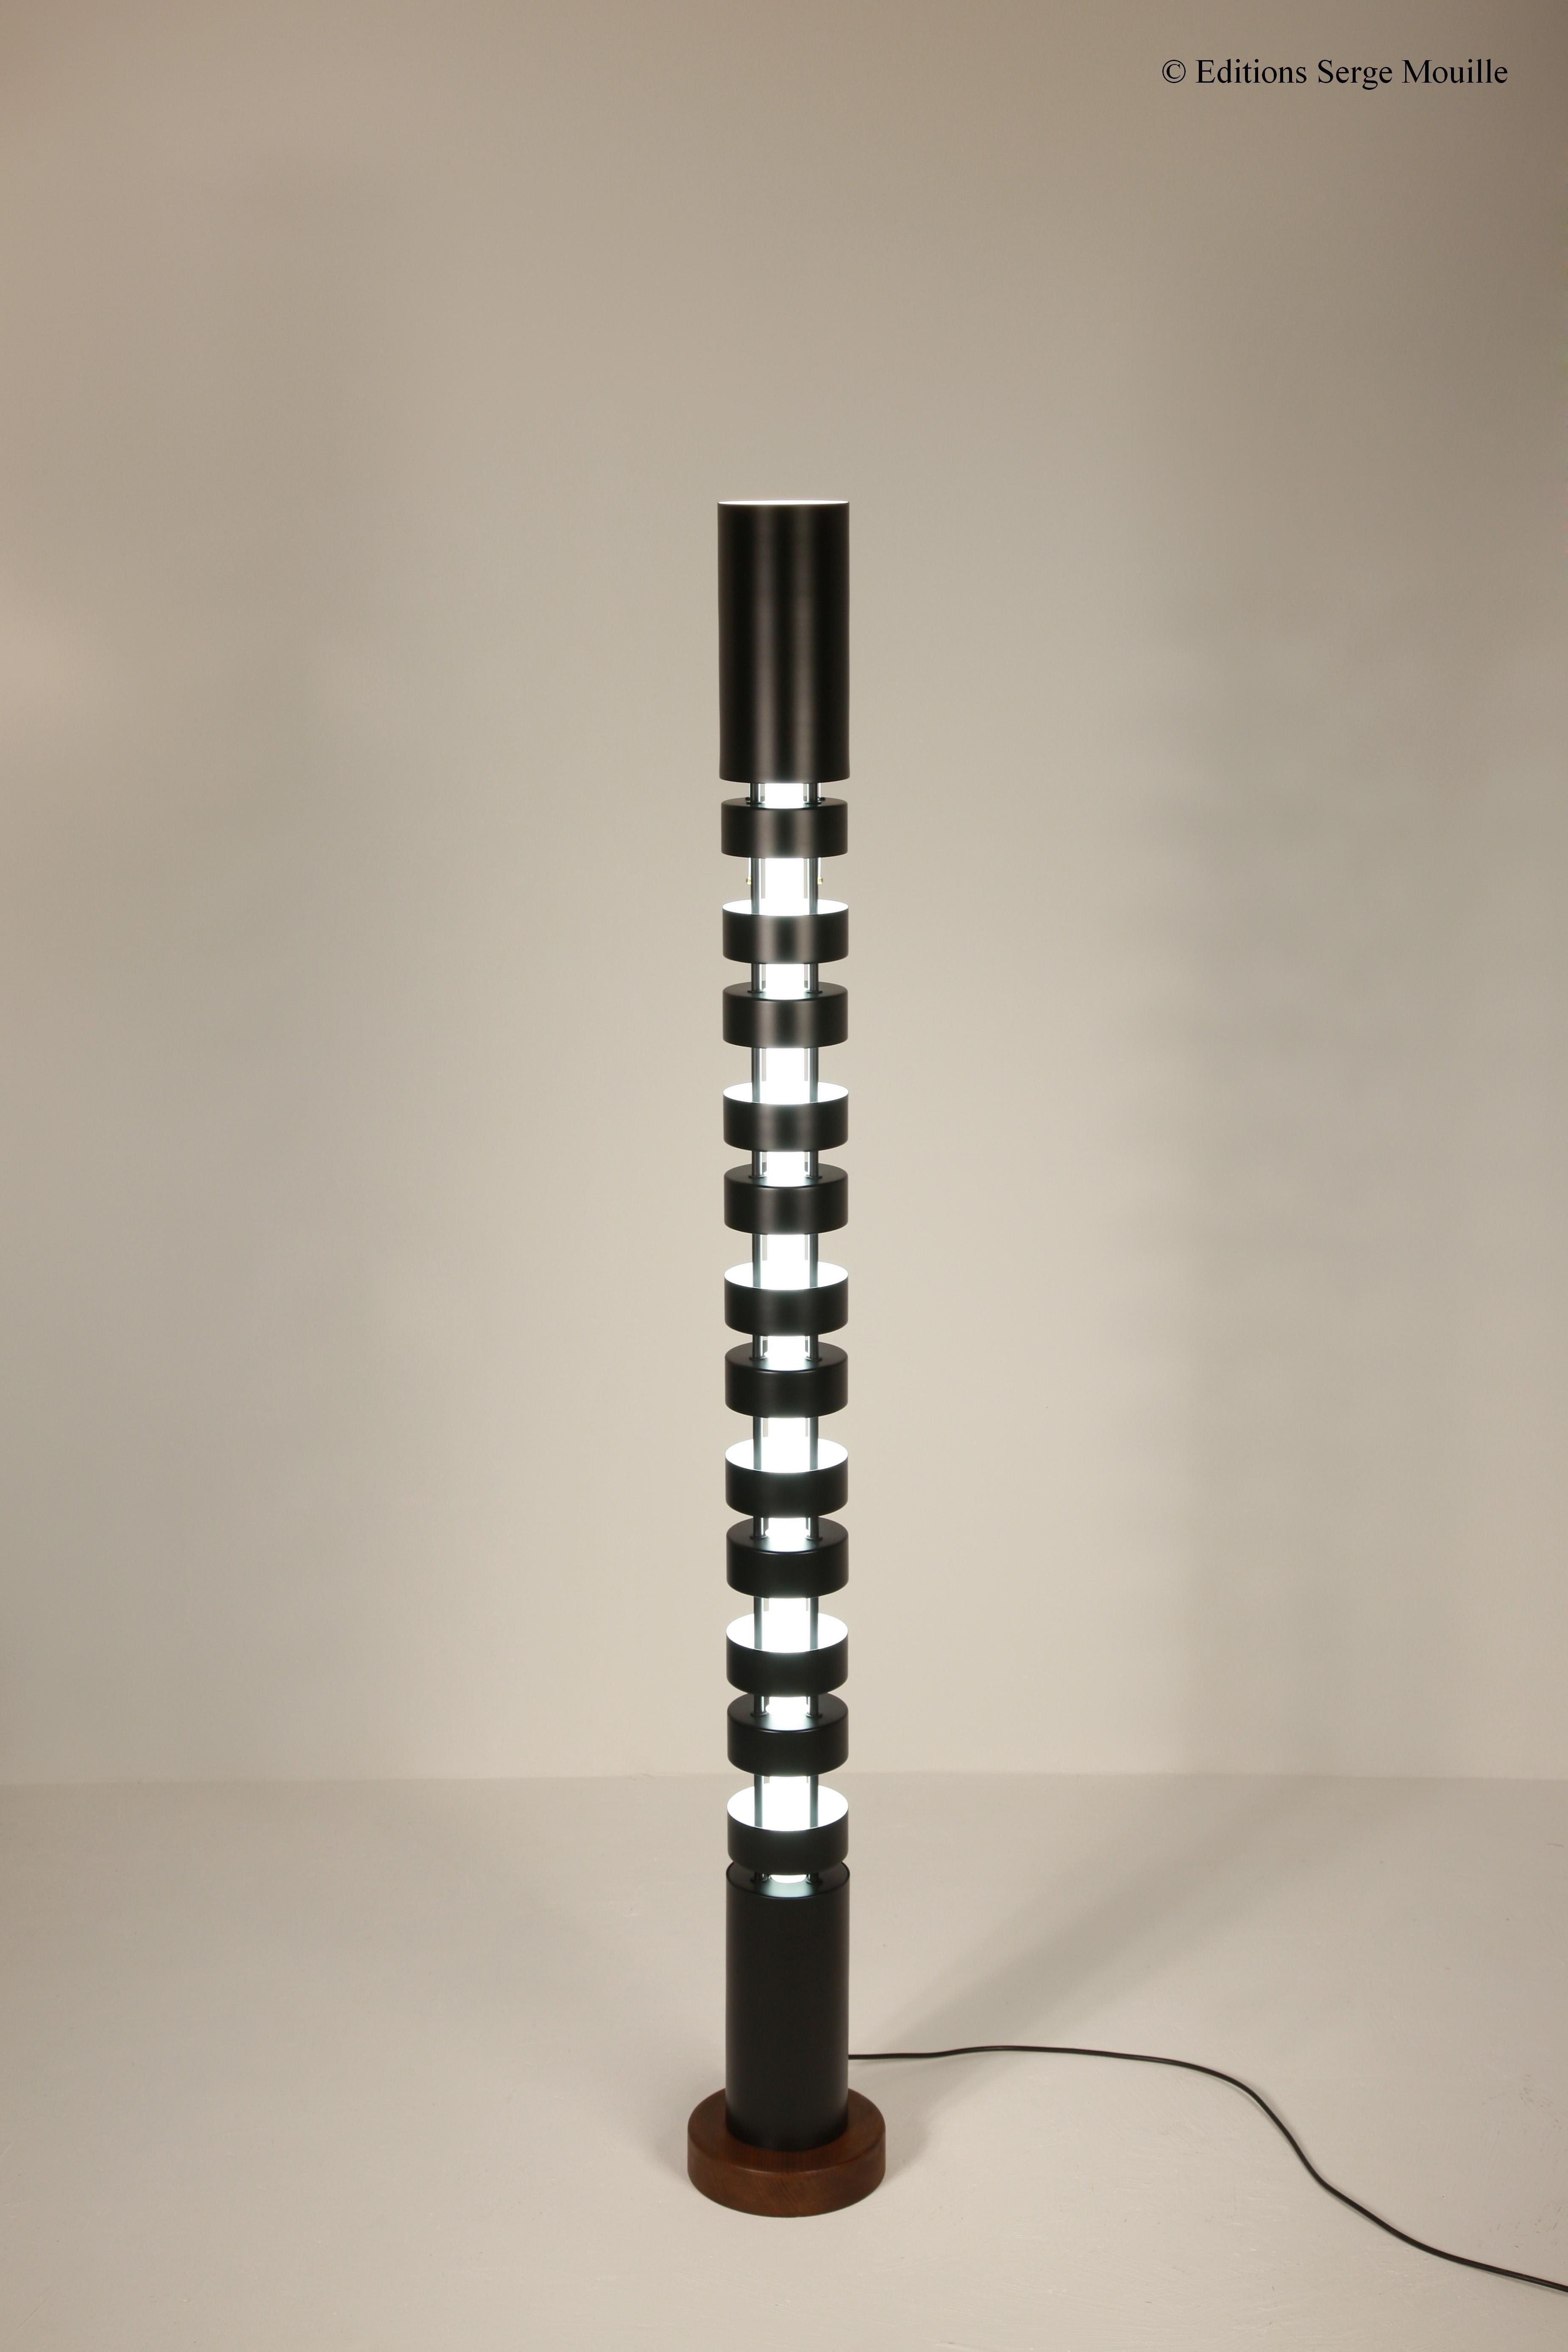 Column lamp large totem by Serge Mouille
Dimensions: D16 x H173 cm
Materials: Steel, Glass
One of a King. Numbered.
Also available in different colour and dimensions.

All our lamps can be wired according to each country. If sold to the USA it